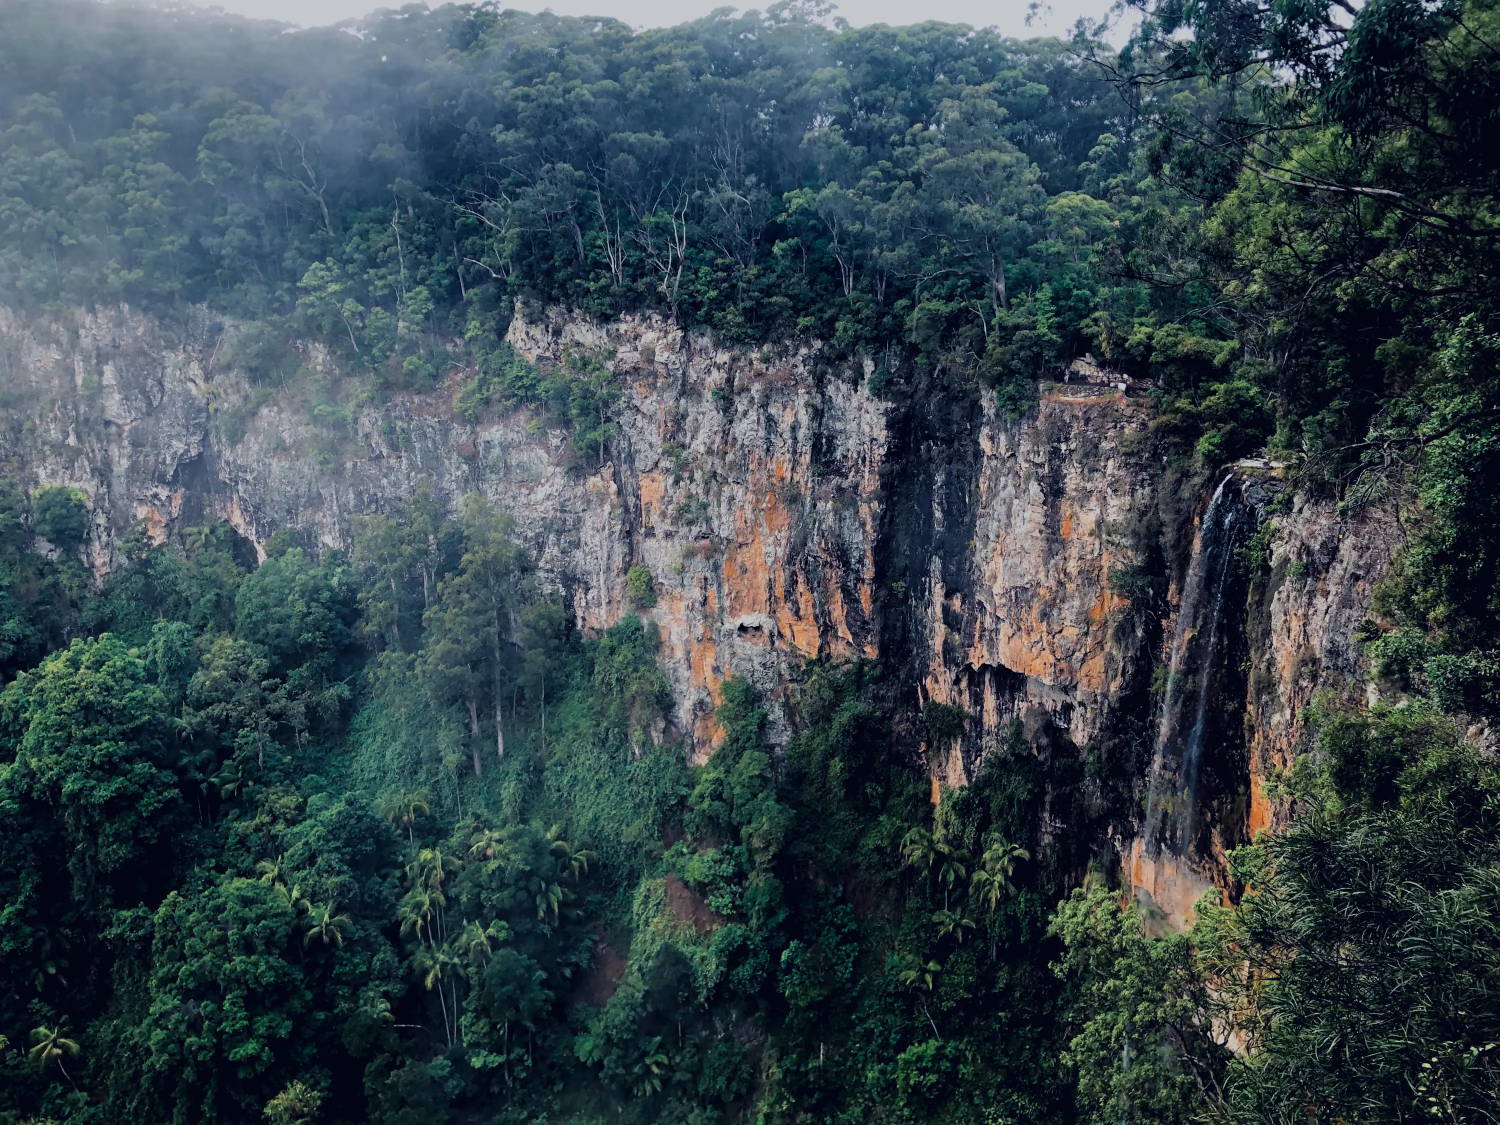 Overhead shot of a rainforest nestled into the side of a cliff